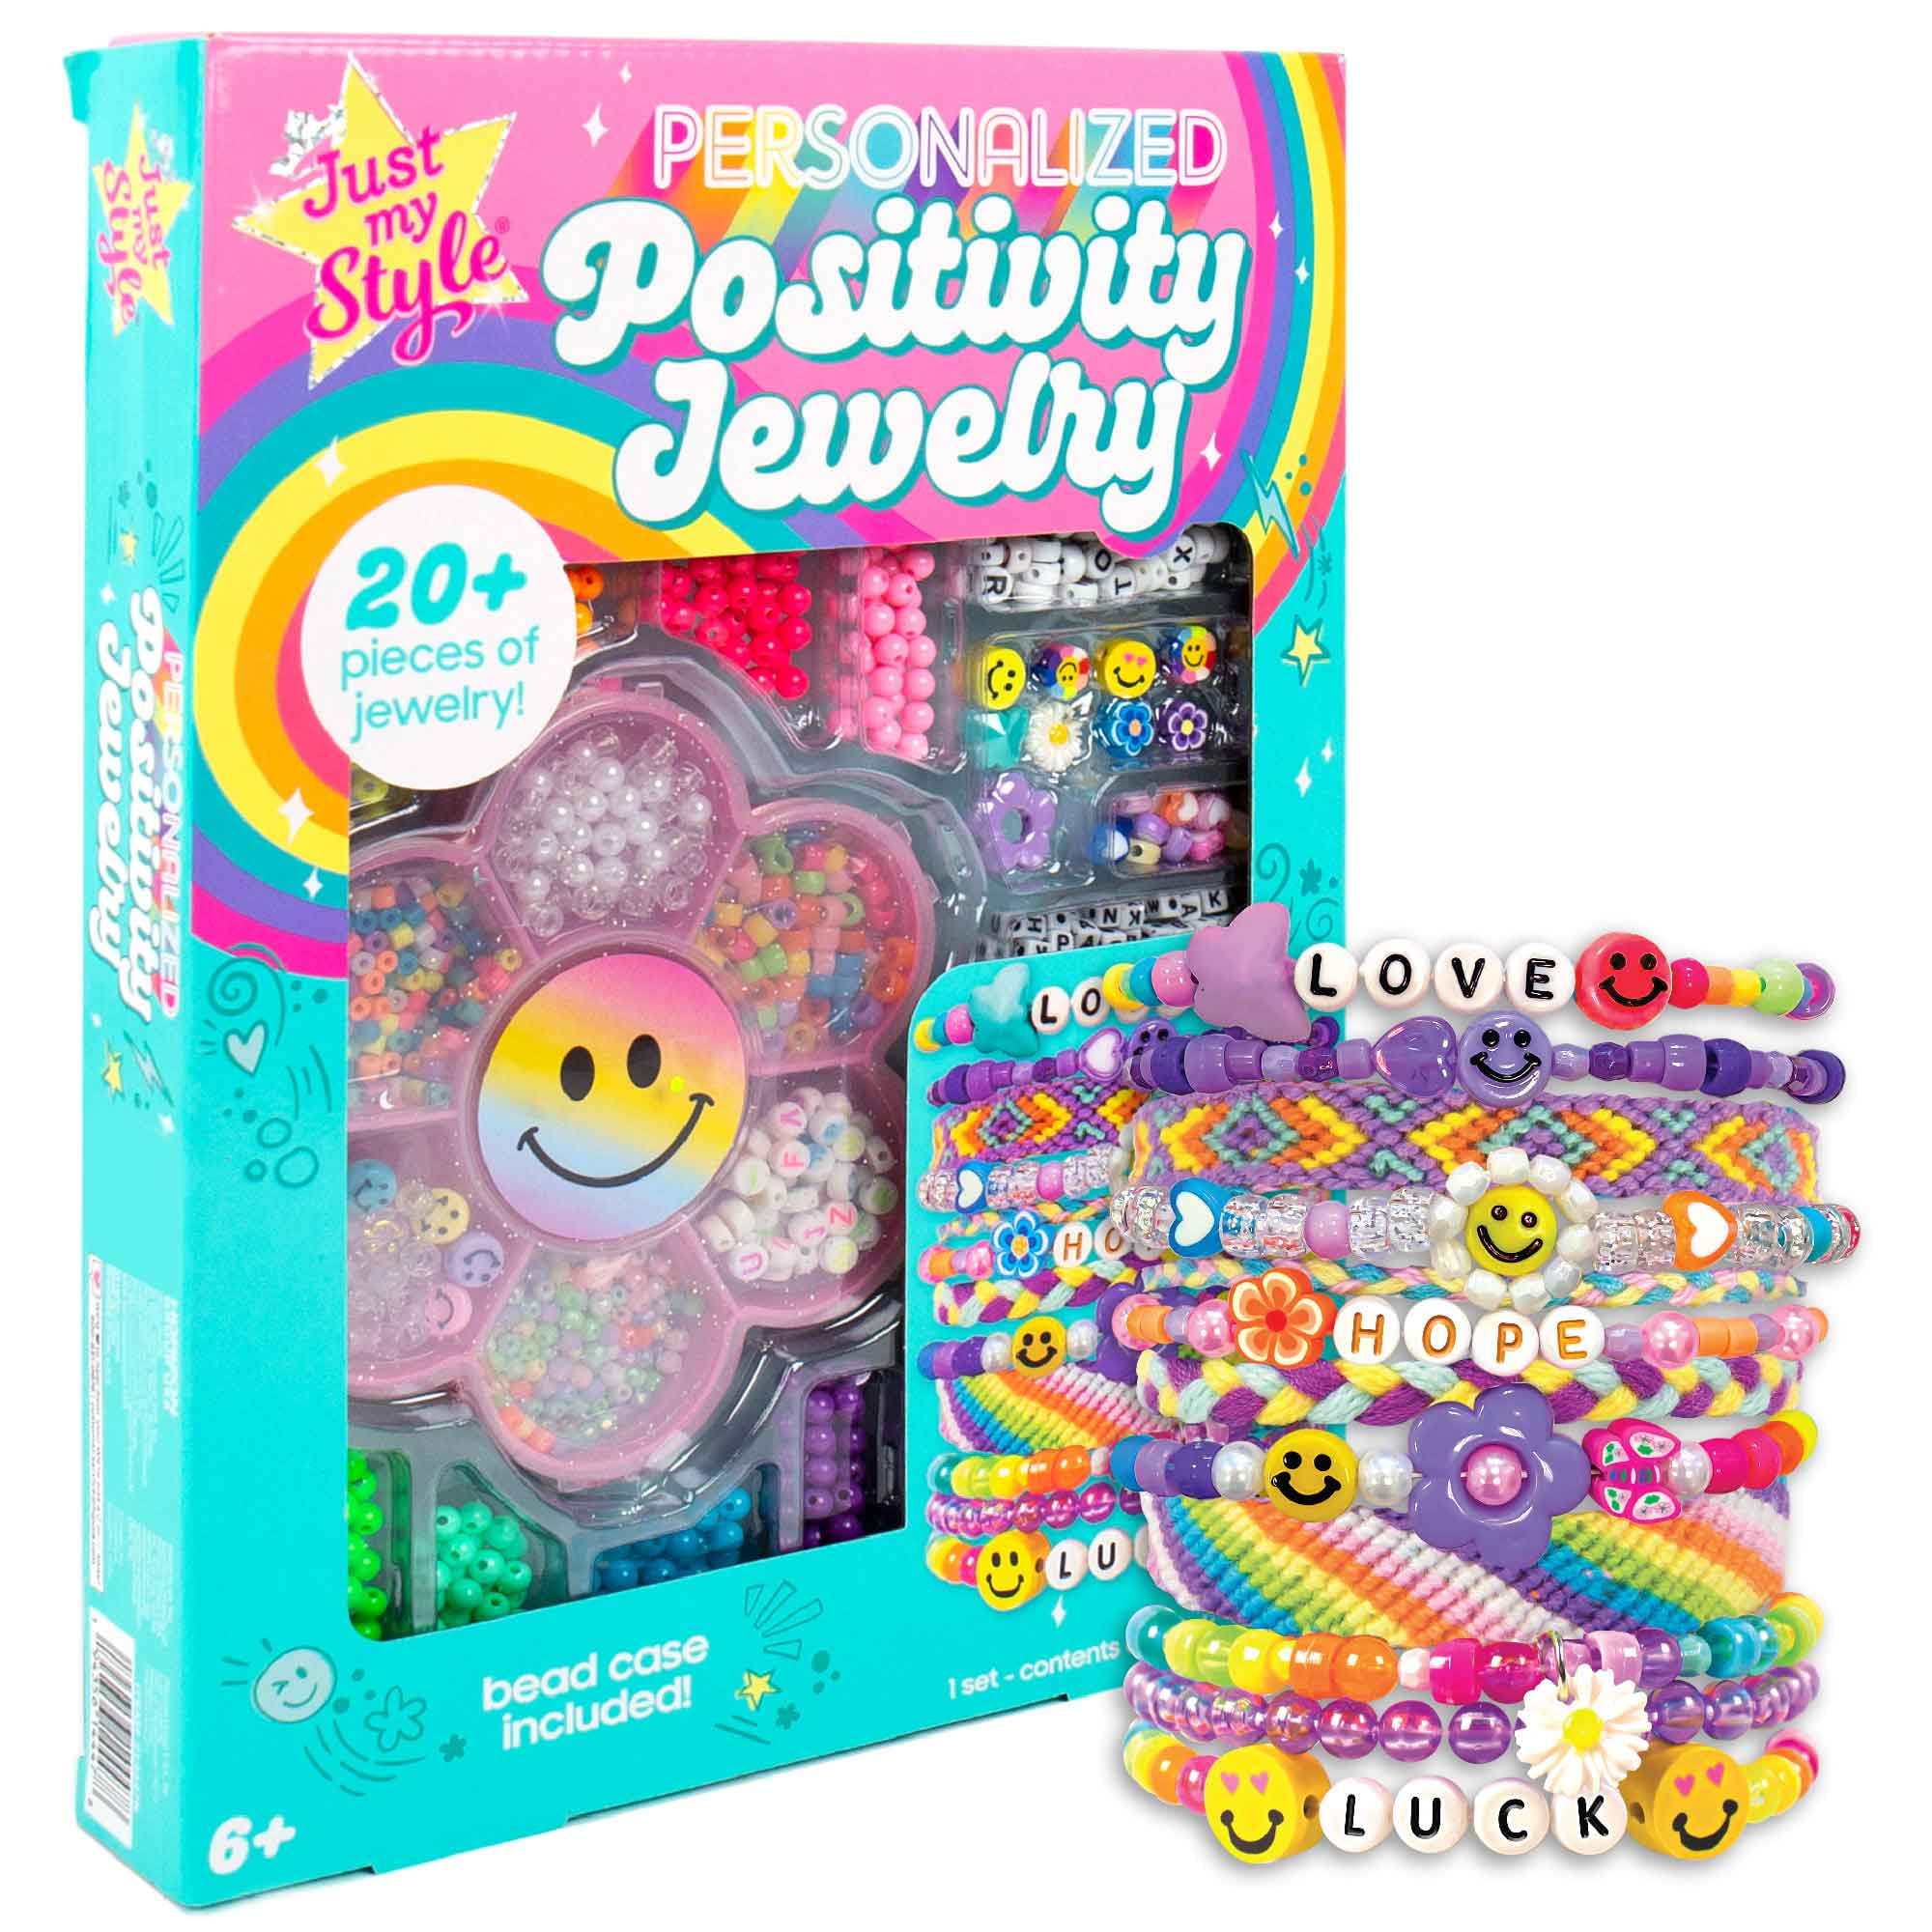 Target, Walmart, and toy importer sued for toxic levels of lead in kids' jewelry  kits